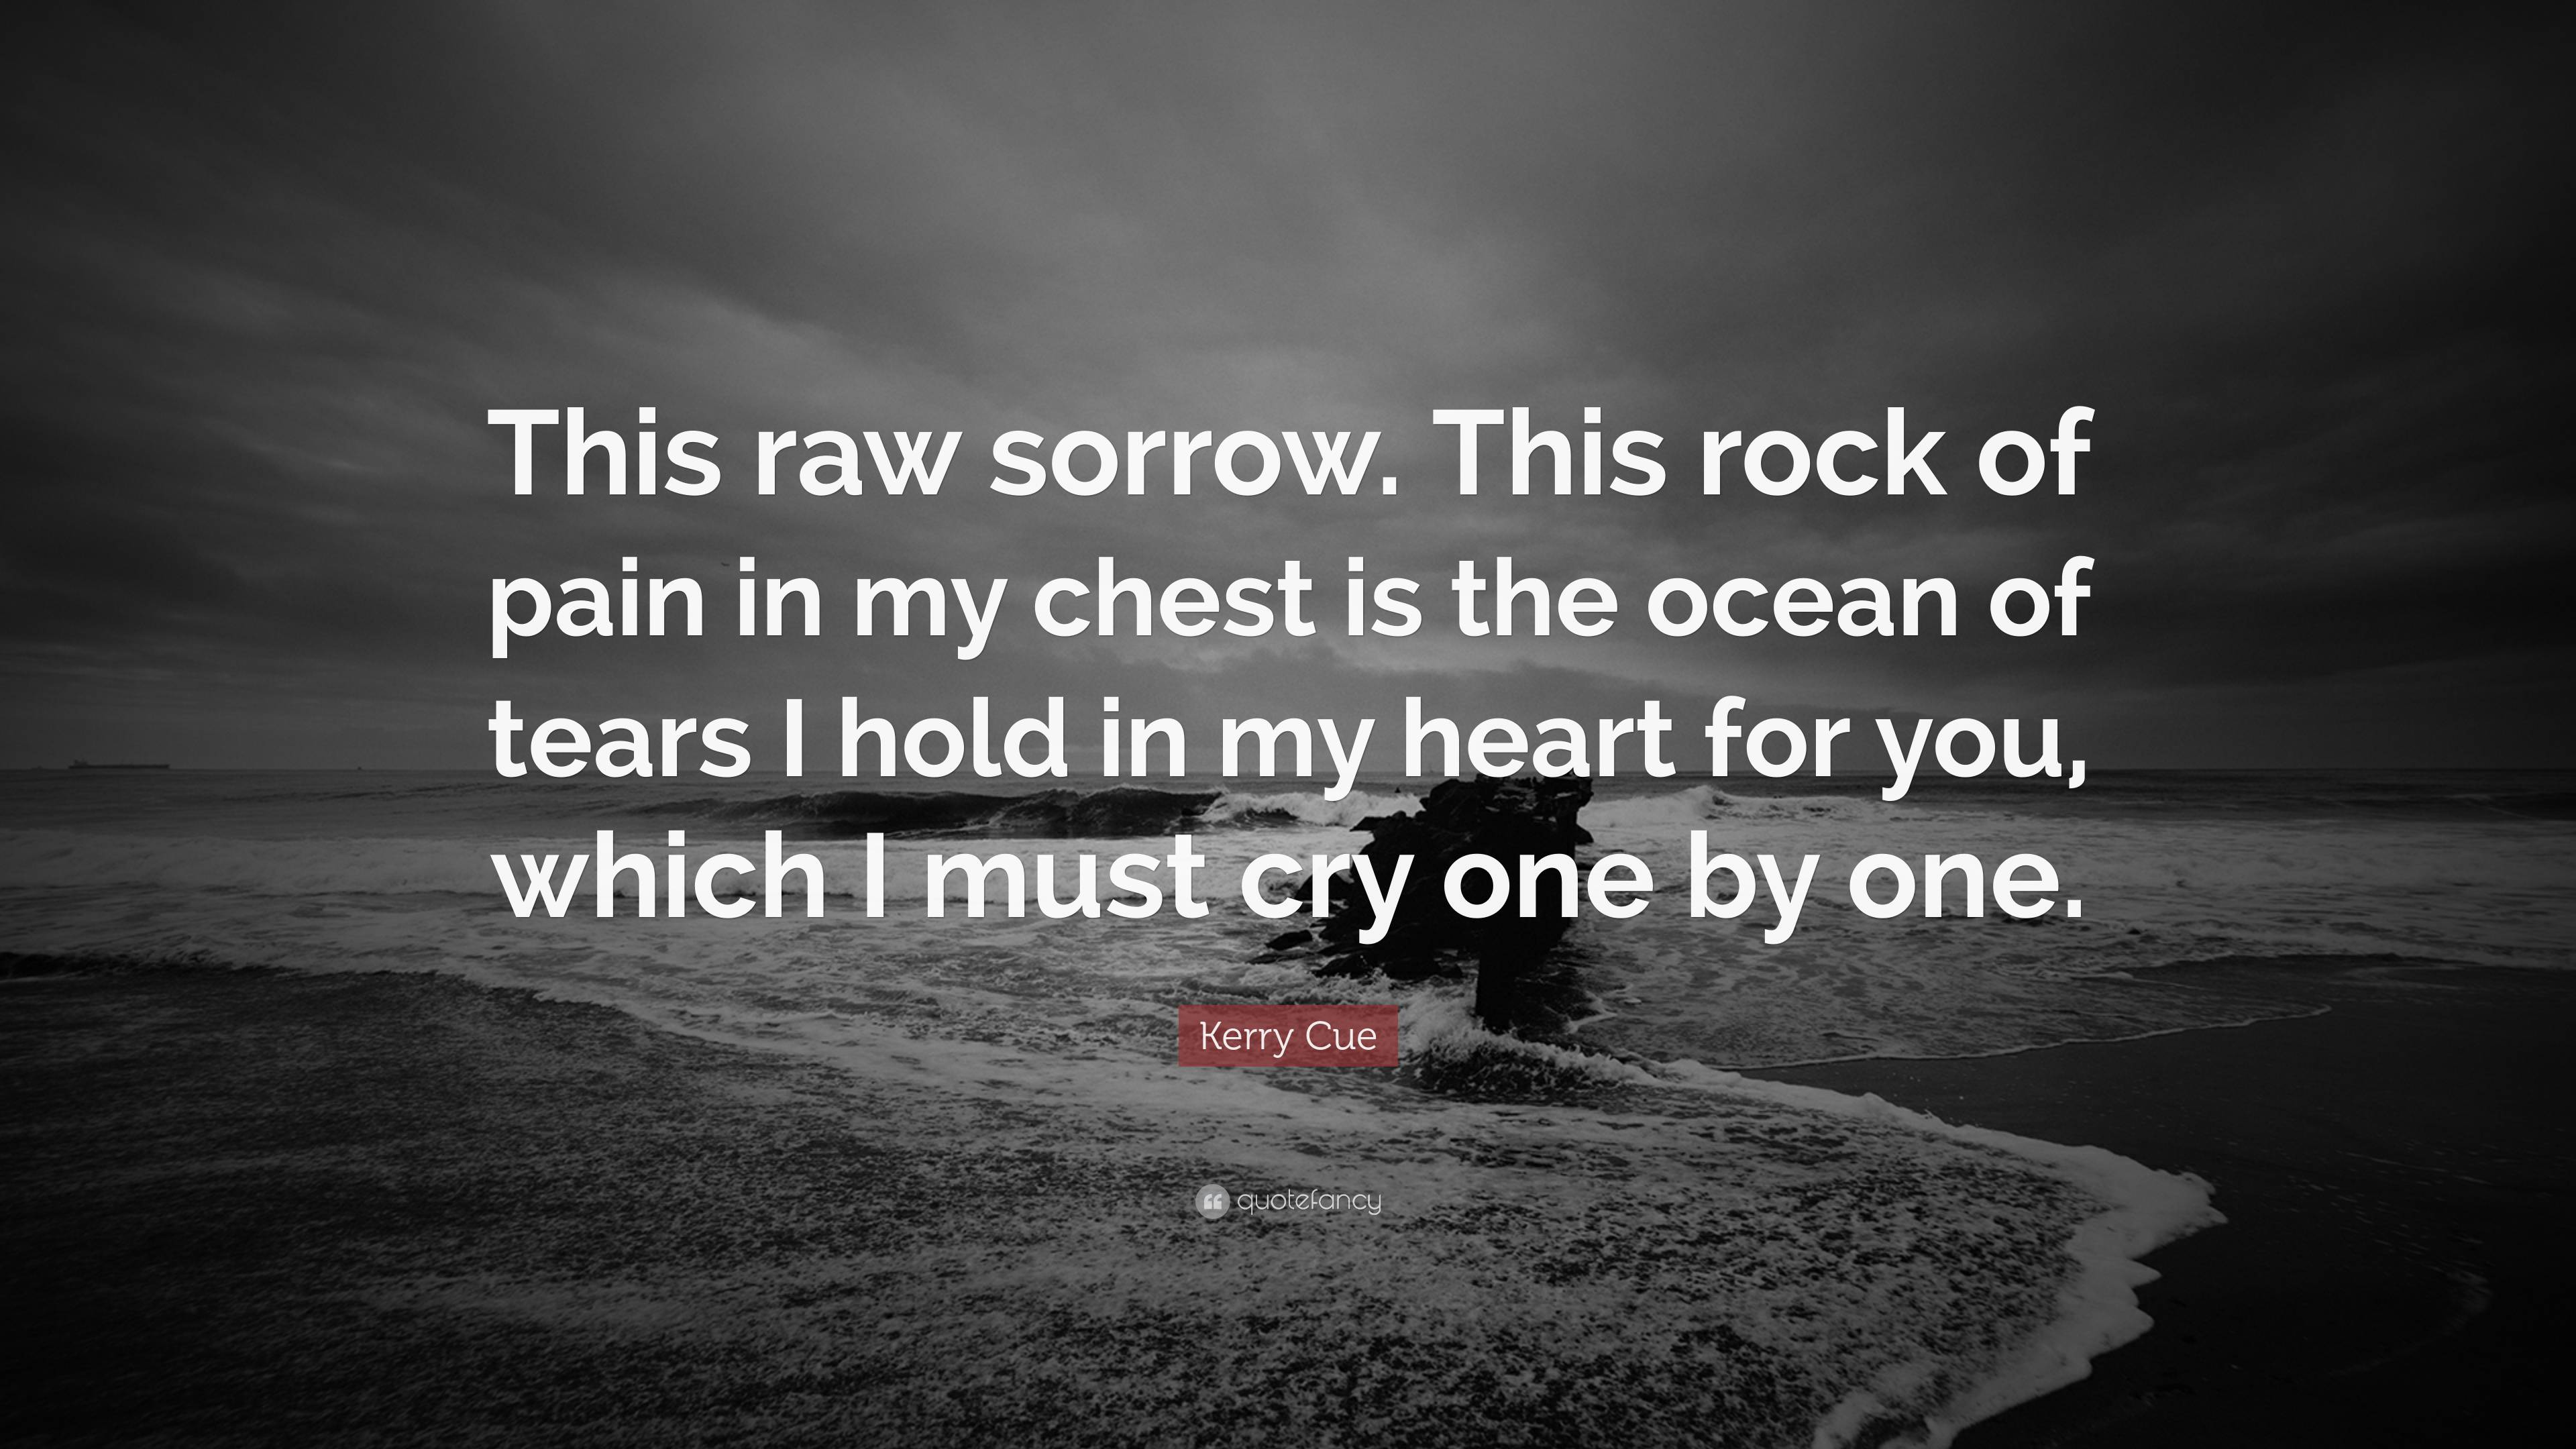 Kerry Cue Quote: “This raw sorrow. This rock of pain in my chest